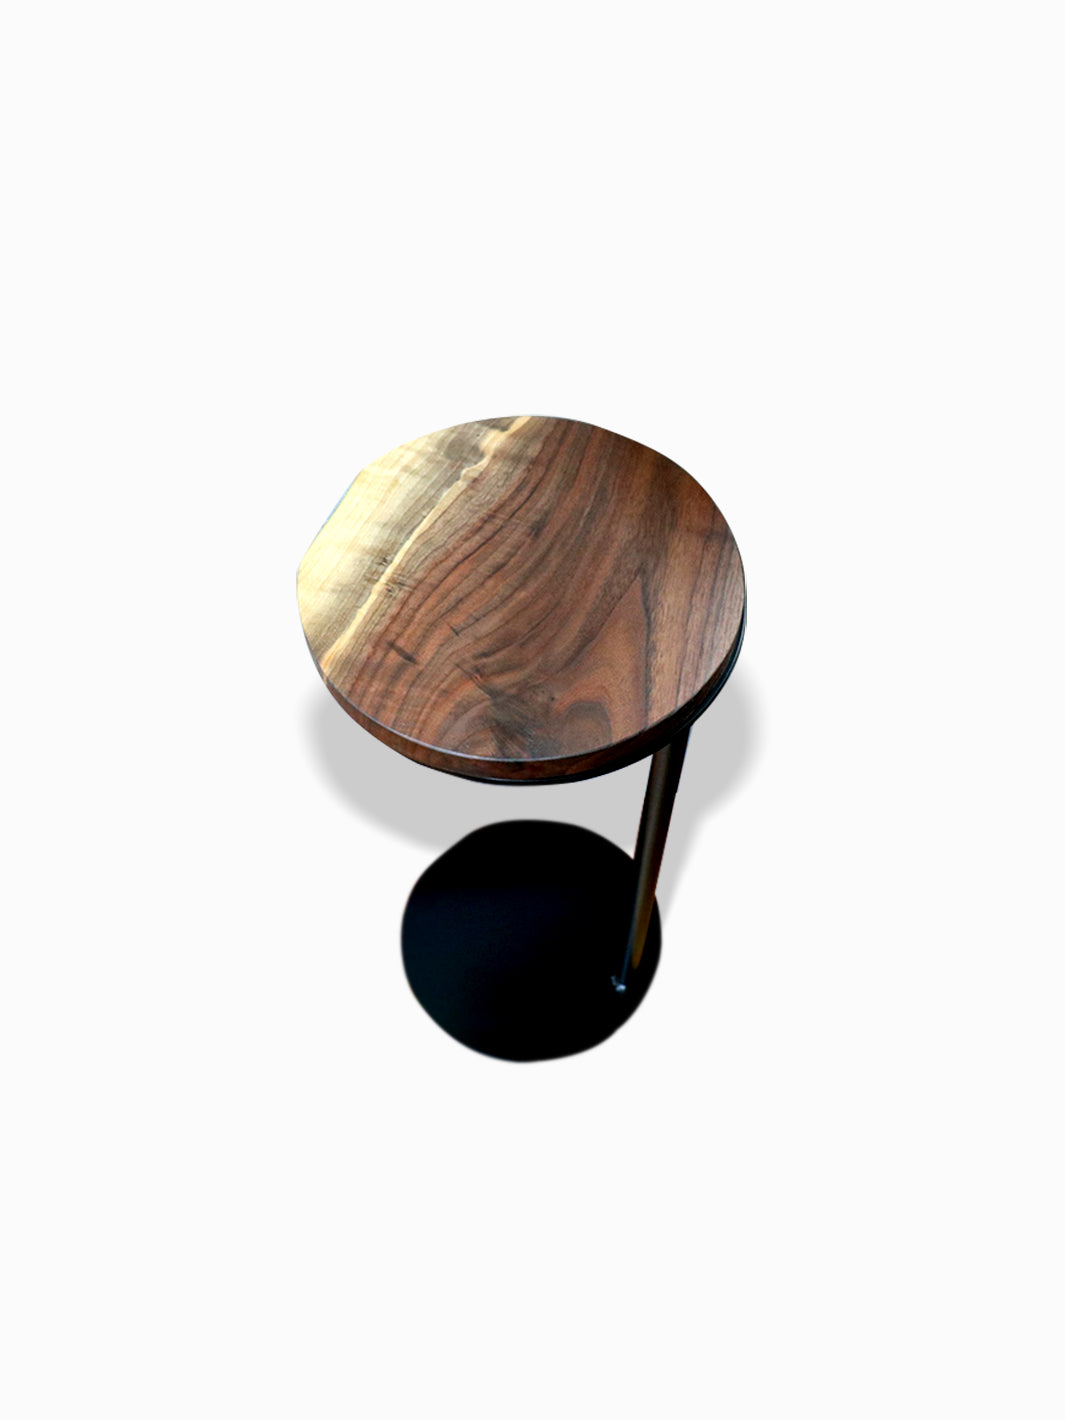 Live-Edge Walnut, Round Industrial Side Table Earthly Comfort Side Tables 1763